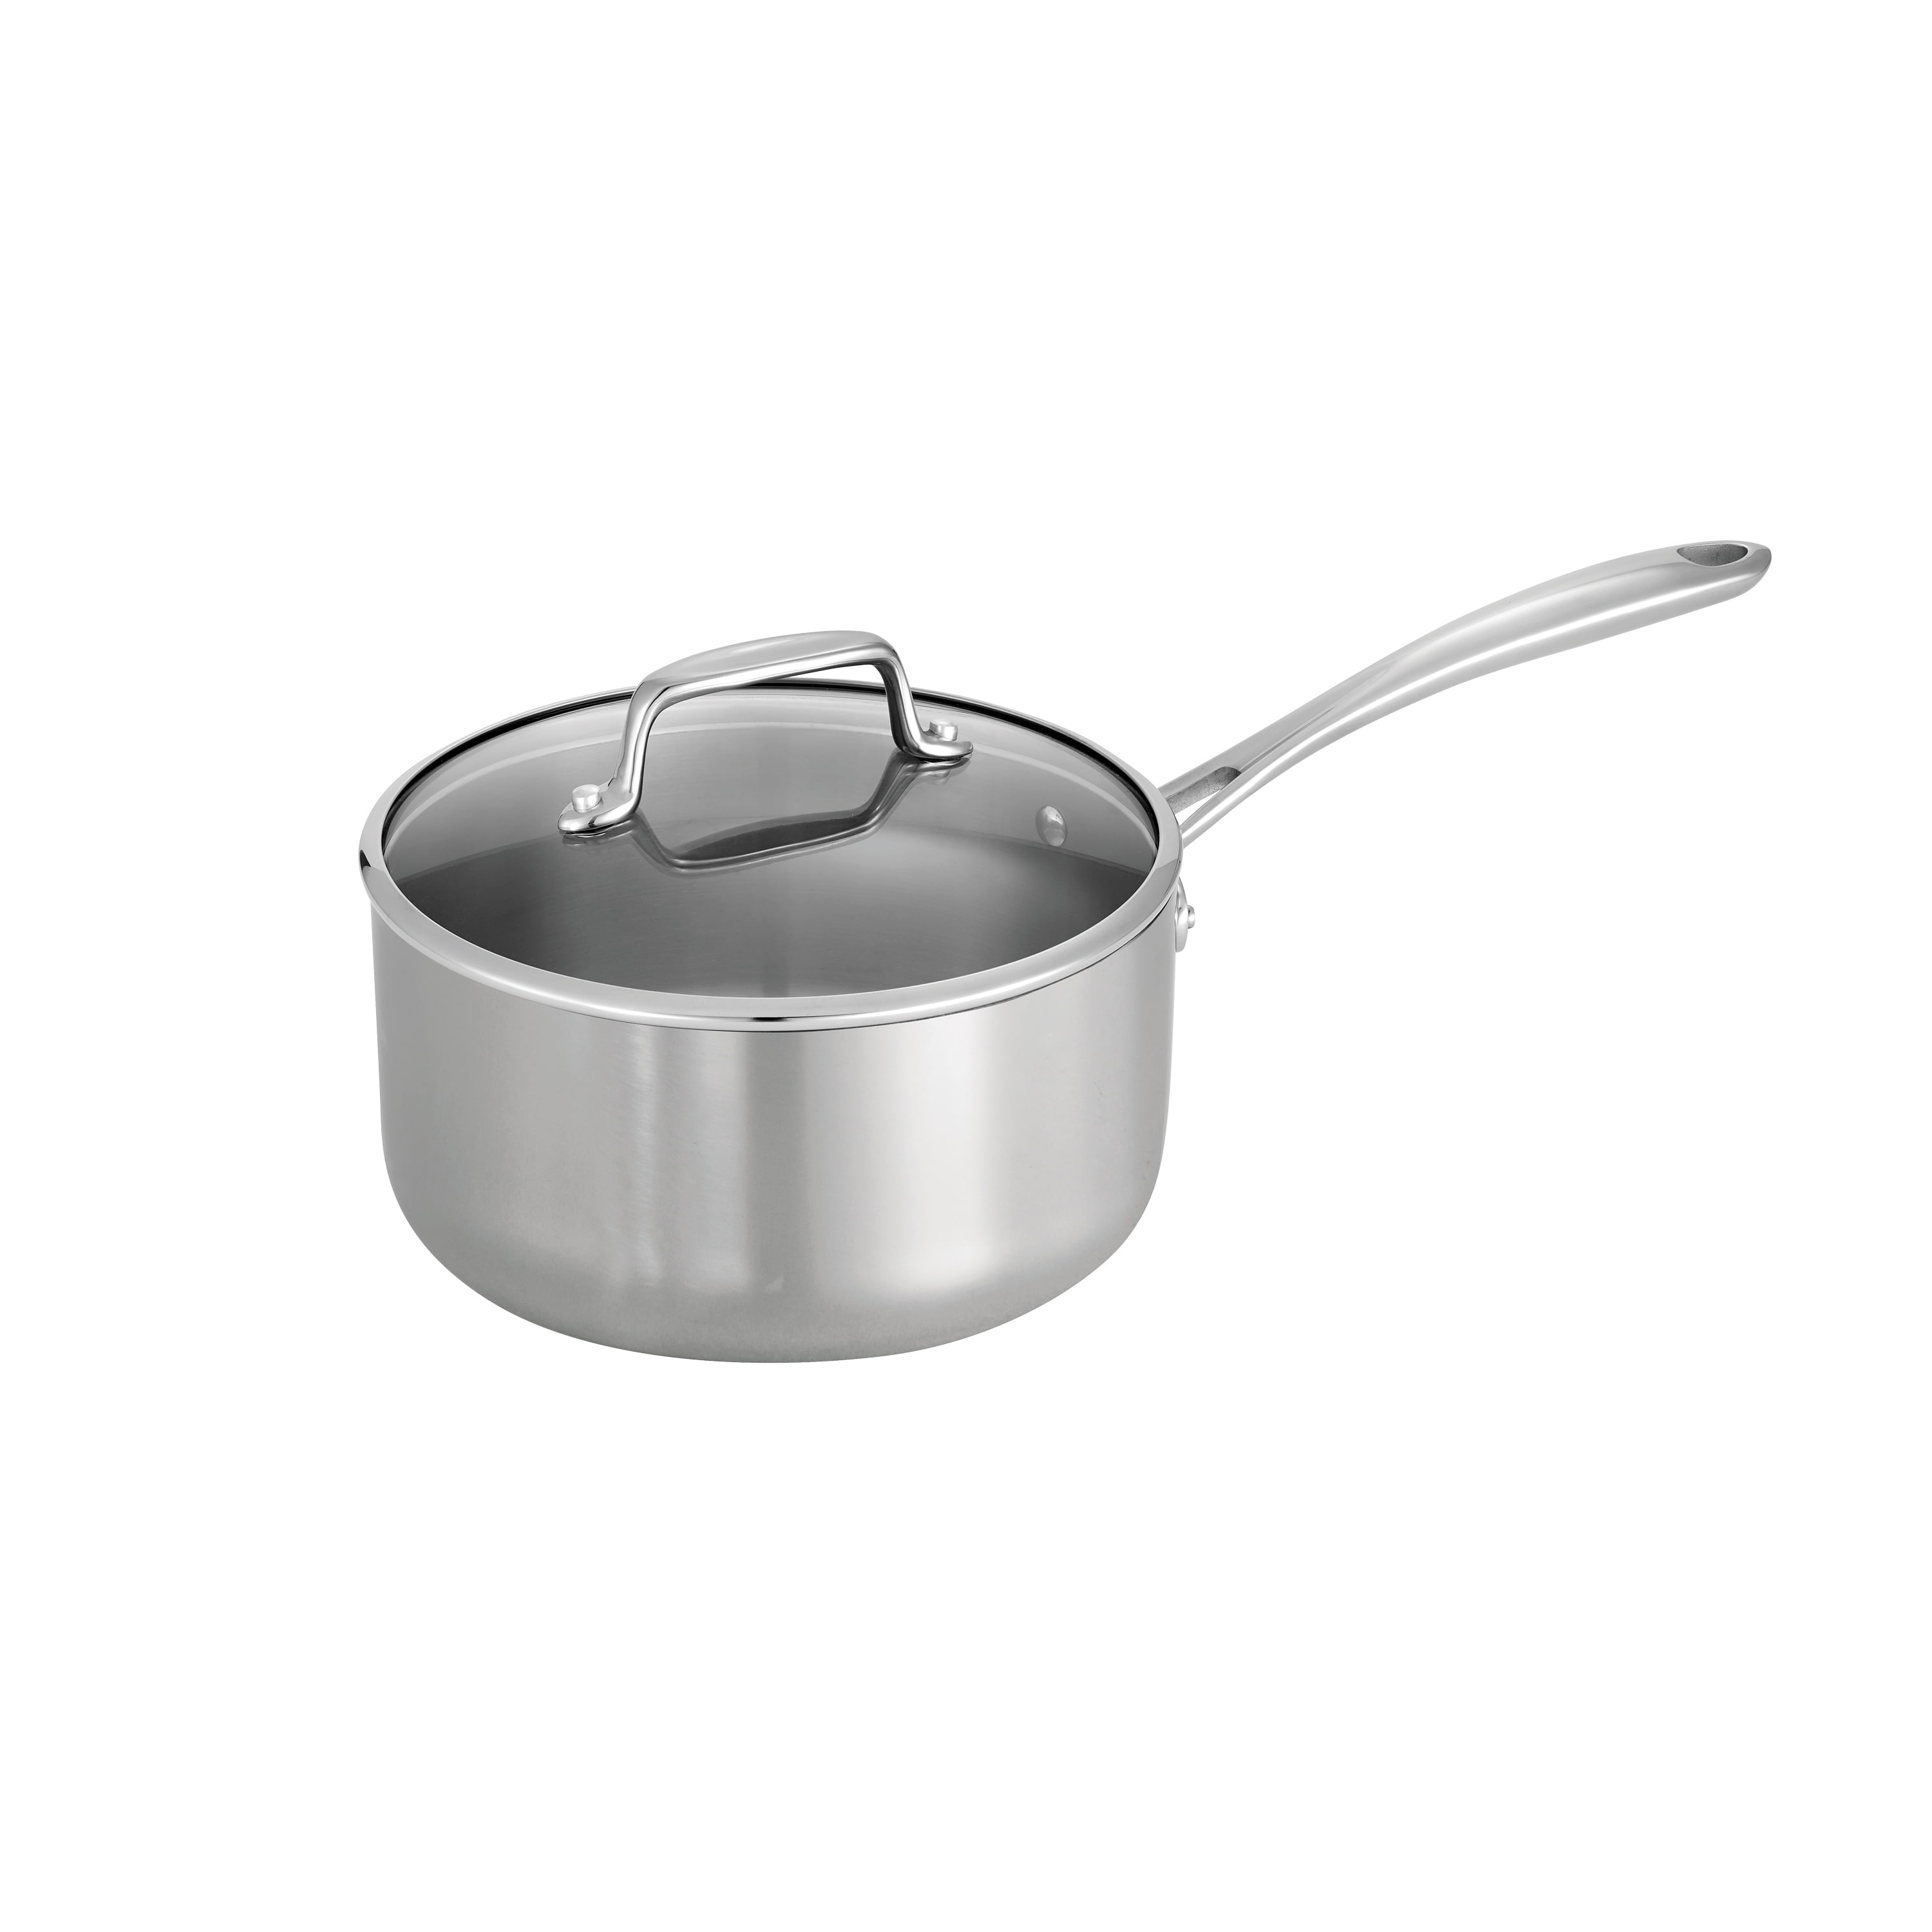 Tri-Ply Clad 3 Qt Covered Stainless Steel Sauce Pan - Walmart.com All Clad Stainless Steel 3 Qt Covered Saucepan